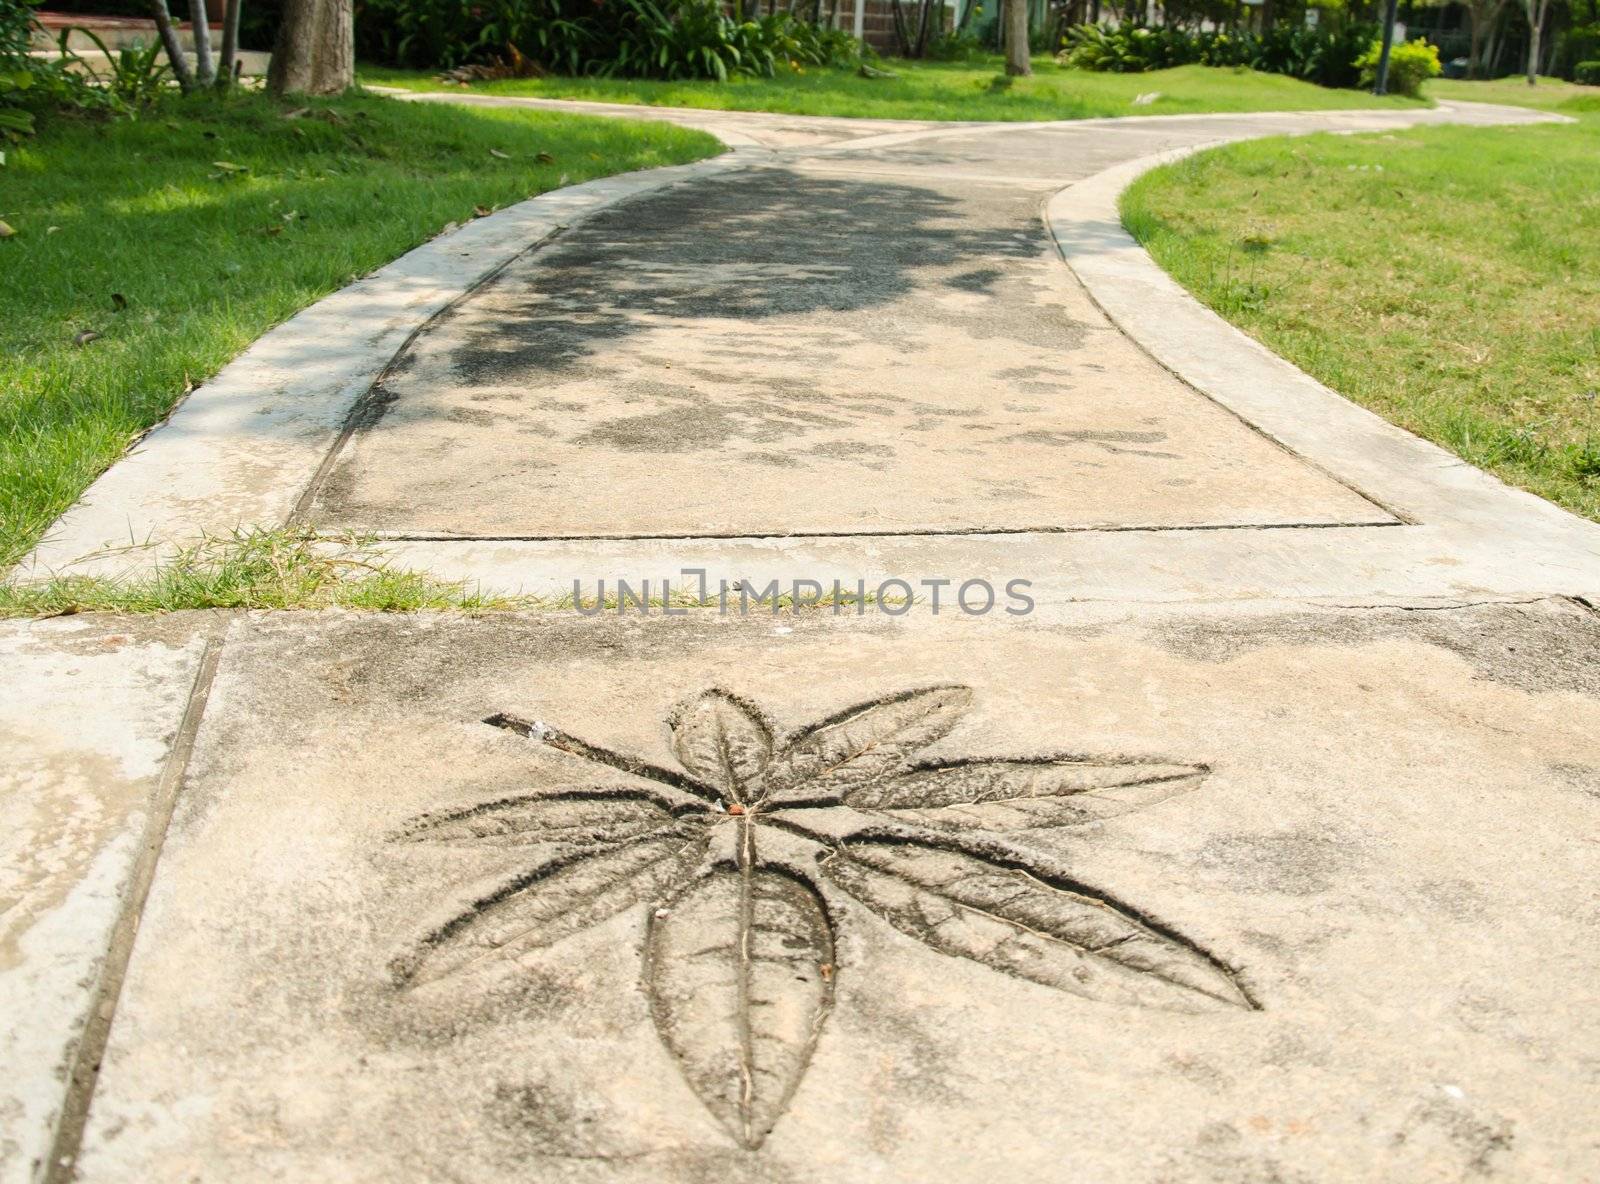 A photo of a pathway - many symbolic uses